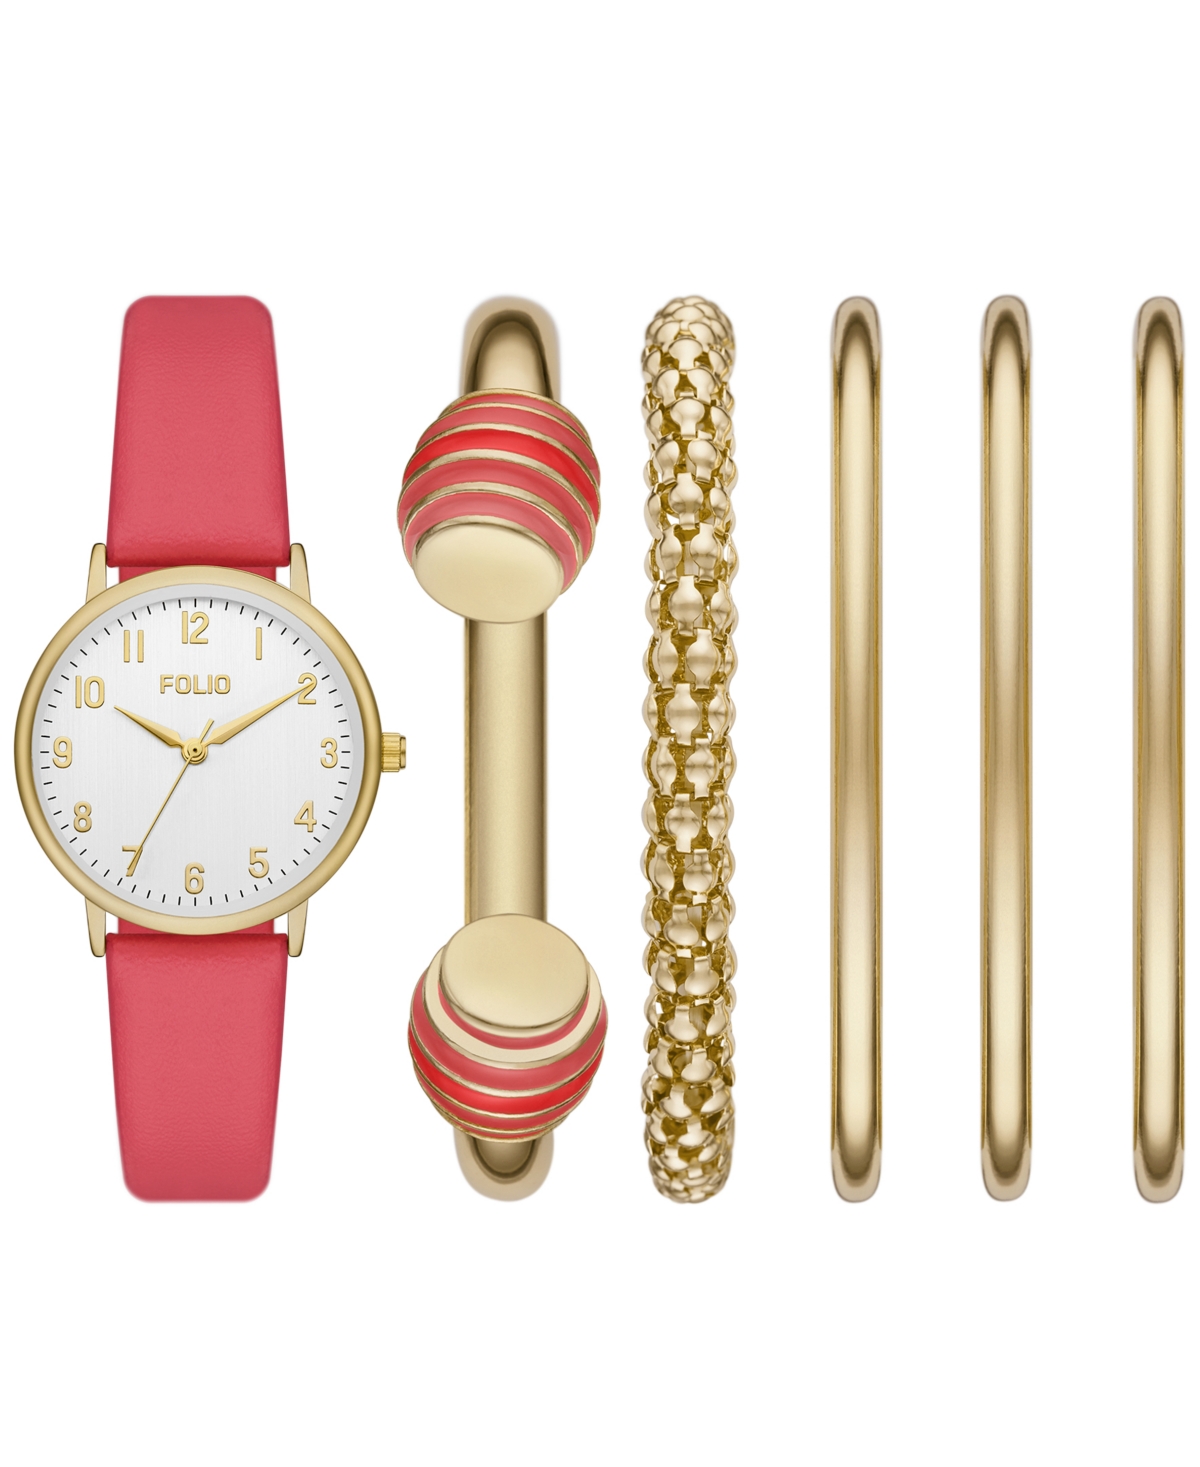 Folio Women's Three Hand Gold-Tone 32mm Watch and Bracelet Gift Set, 6 Pieces